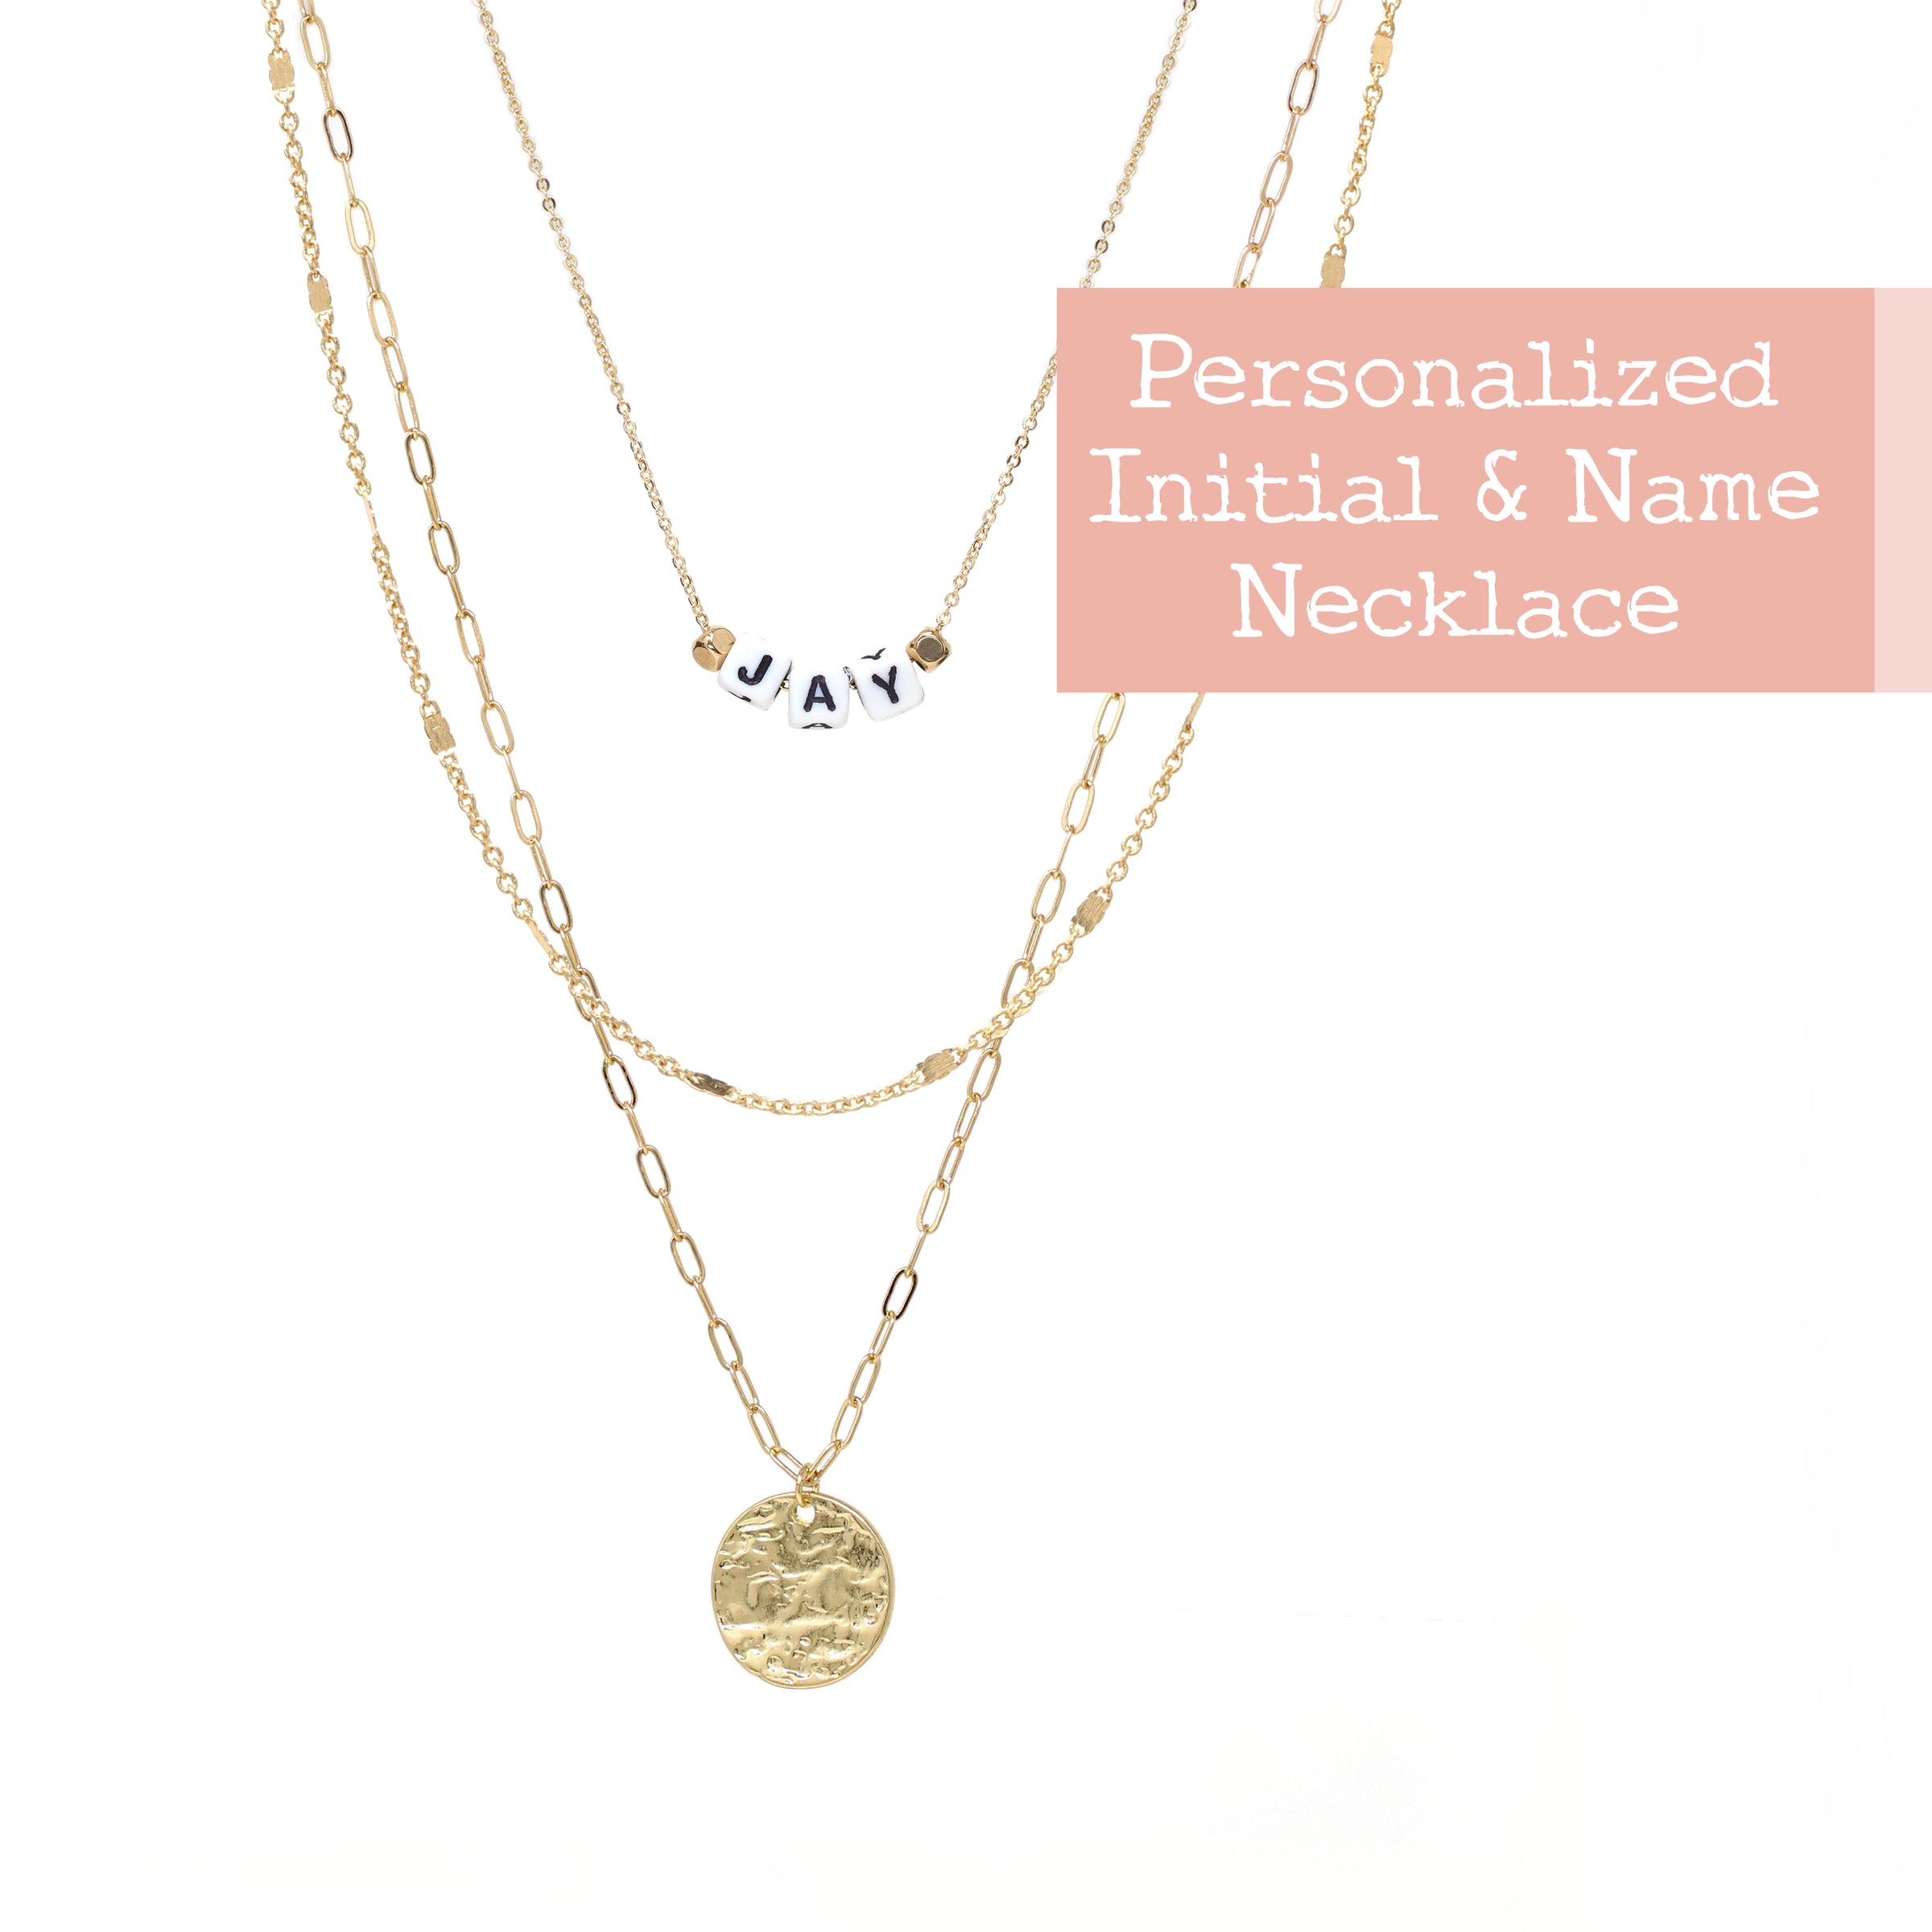 Layer Necklace Set of 2, Delicate Gold Necklace Initial Necklace,  Personalized | eBay